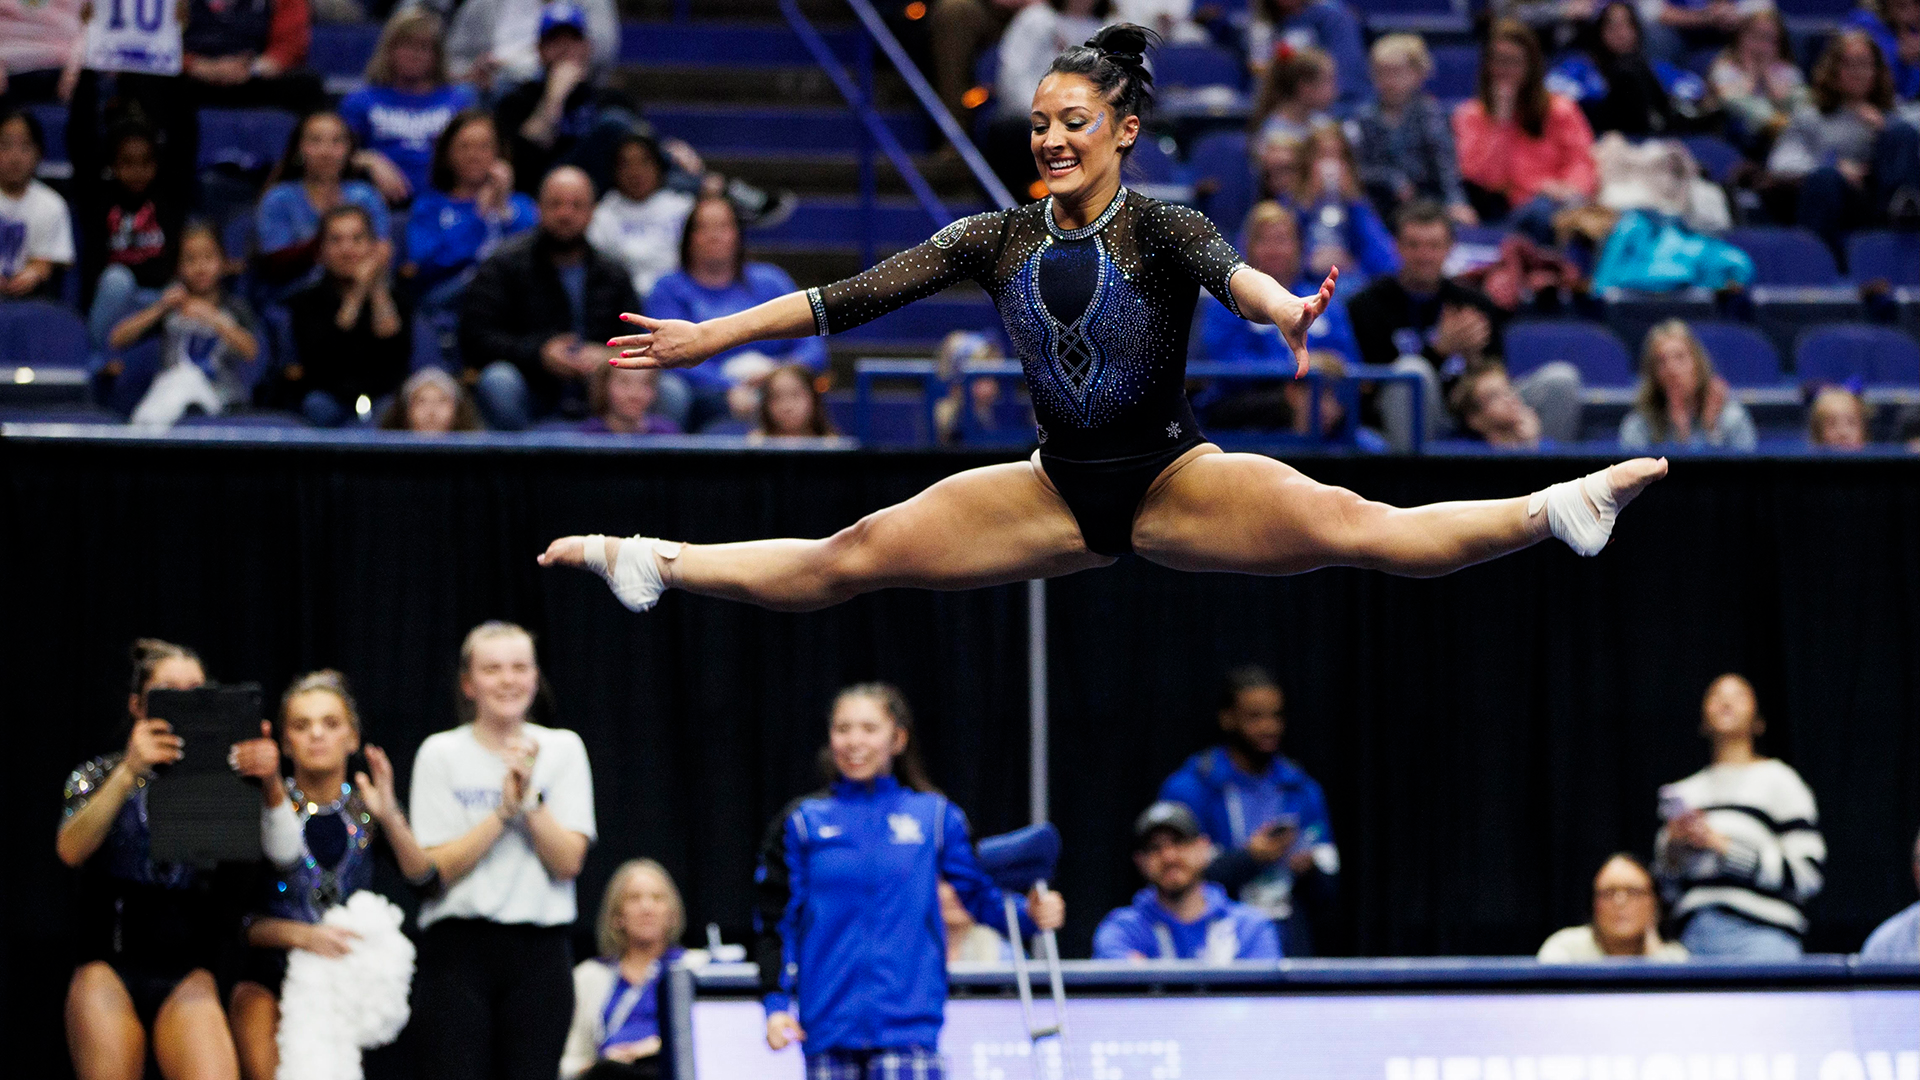 Isabella Magnelli Leading UK Gymnastics On and Off Competition Floor